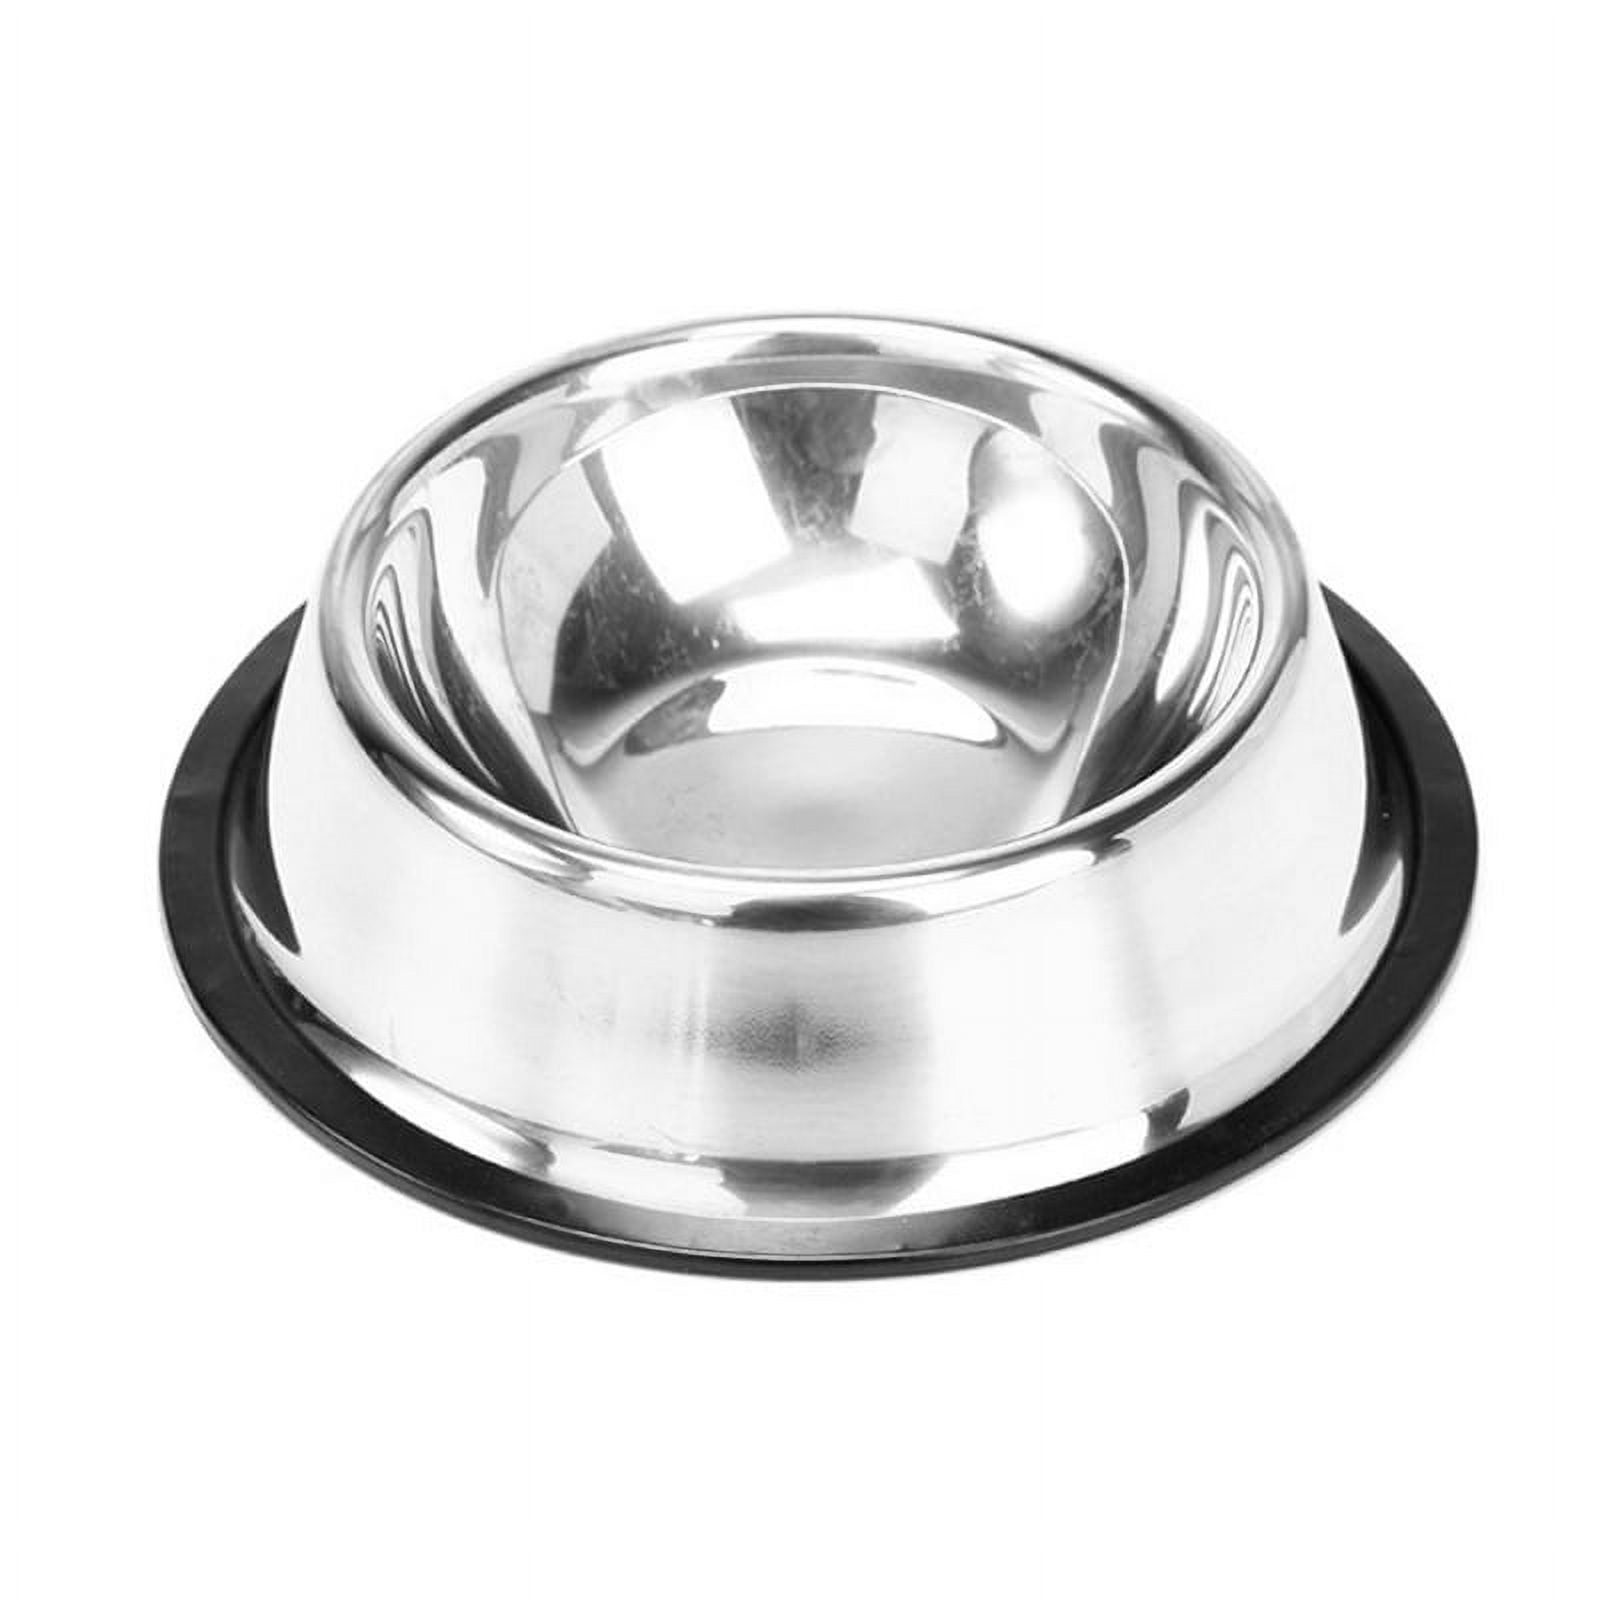 100oz Large Stainless Steel Dog Bowl. Extra Large Dog Water Bowls for Large  Dogs with Rubber Bottom, Drop Resistant and Durable, Keeps Cold, Fits  Different Size Big Dog Food Bowls.(100oz, Pink 